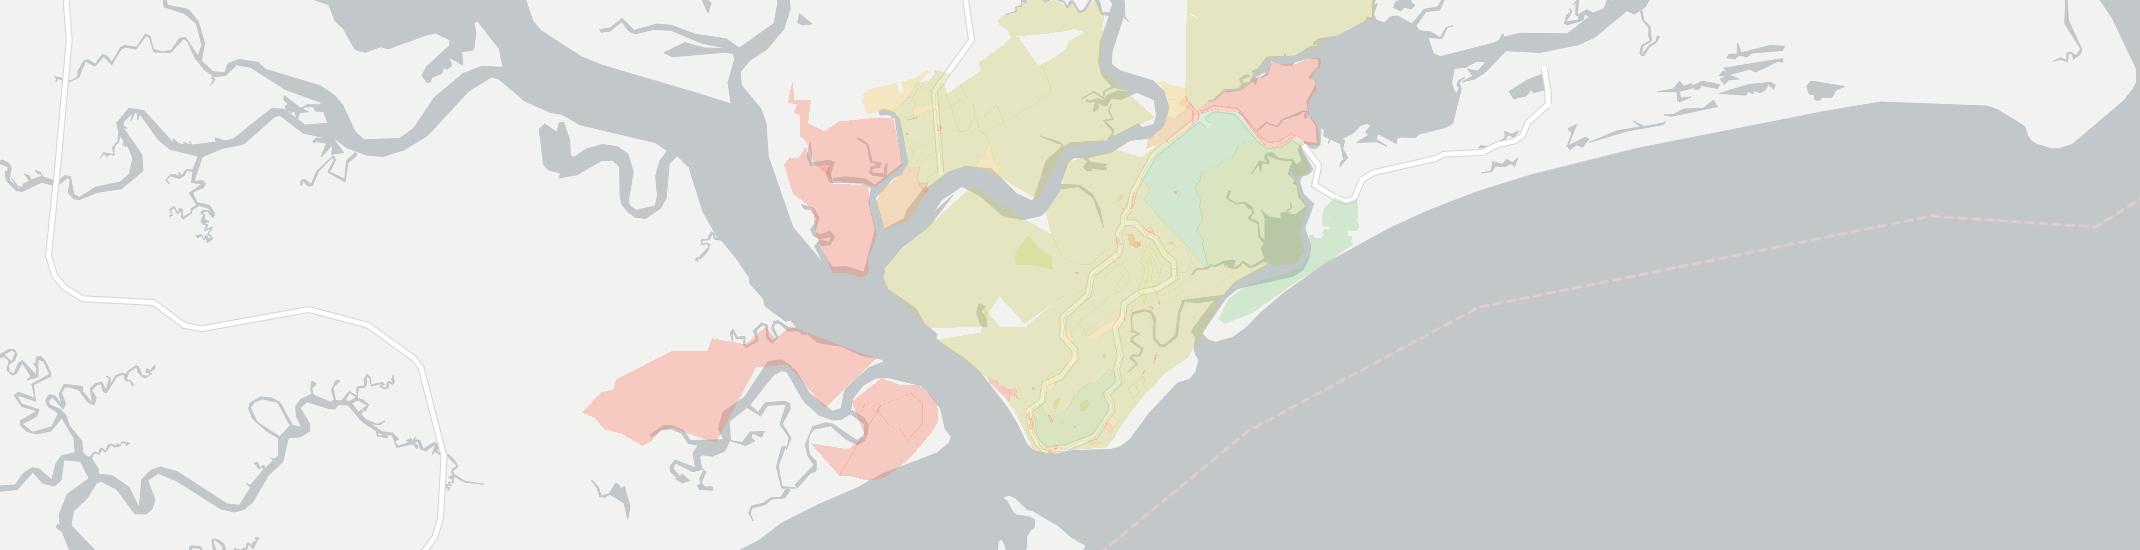 Seabrook Island Internet Competition Map. Click for interactive map.